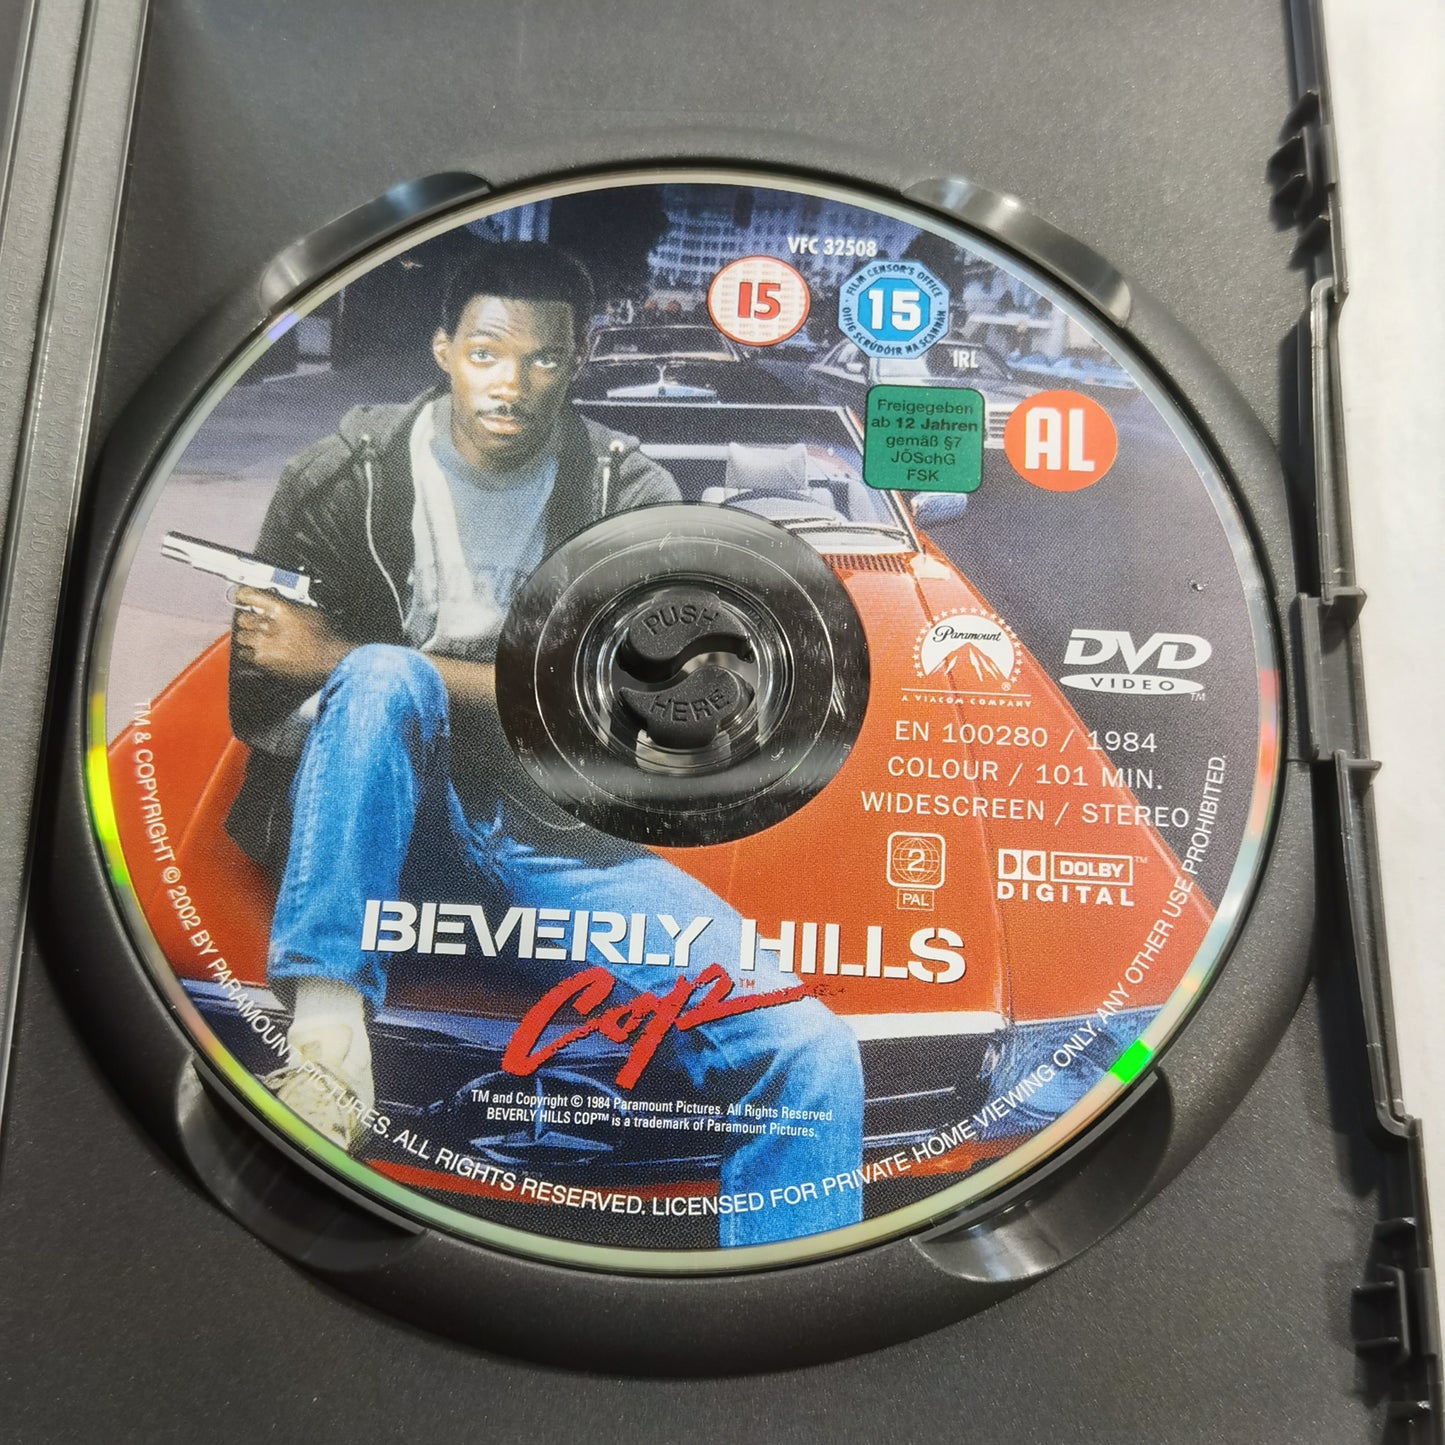 Beverly Hills Cop (1984) - DVD UK 2005 Special Collector's Edition